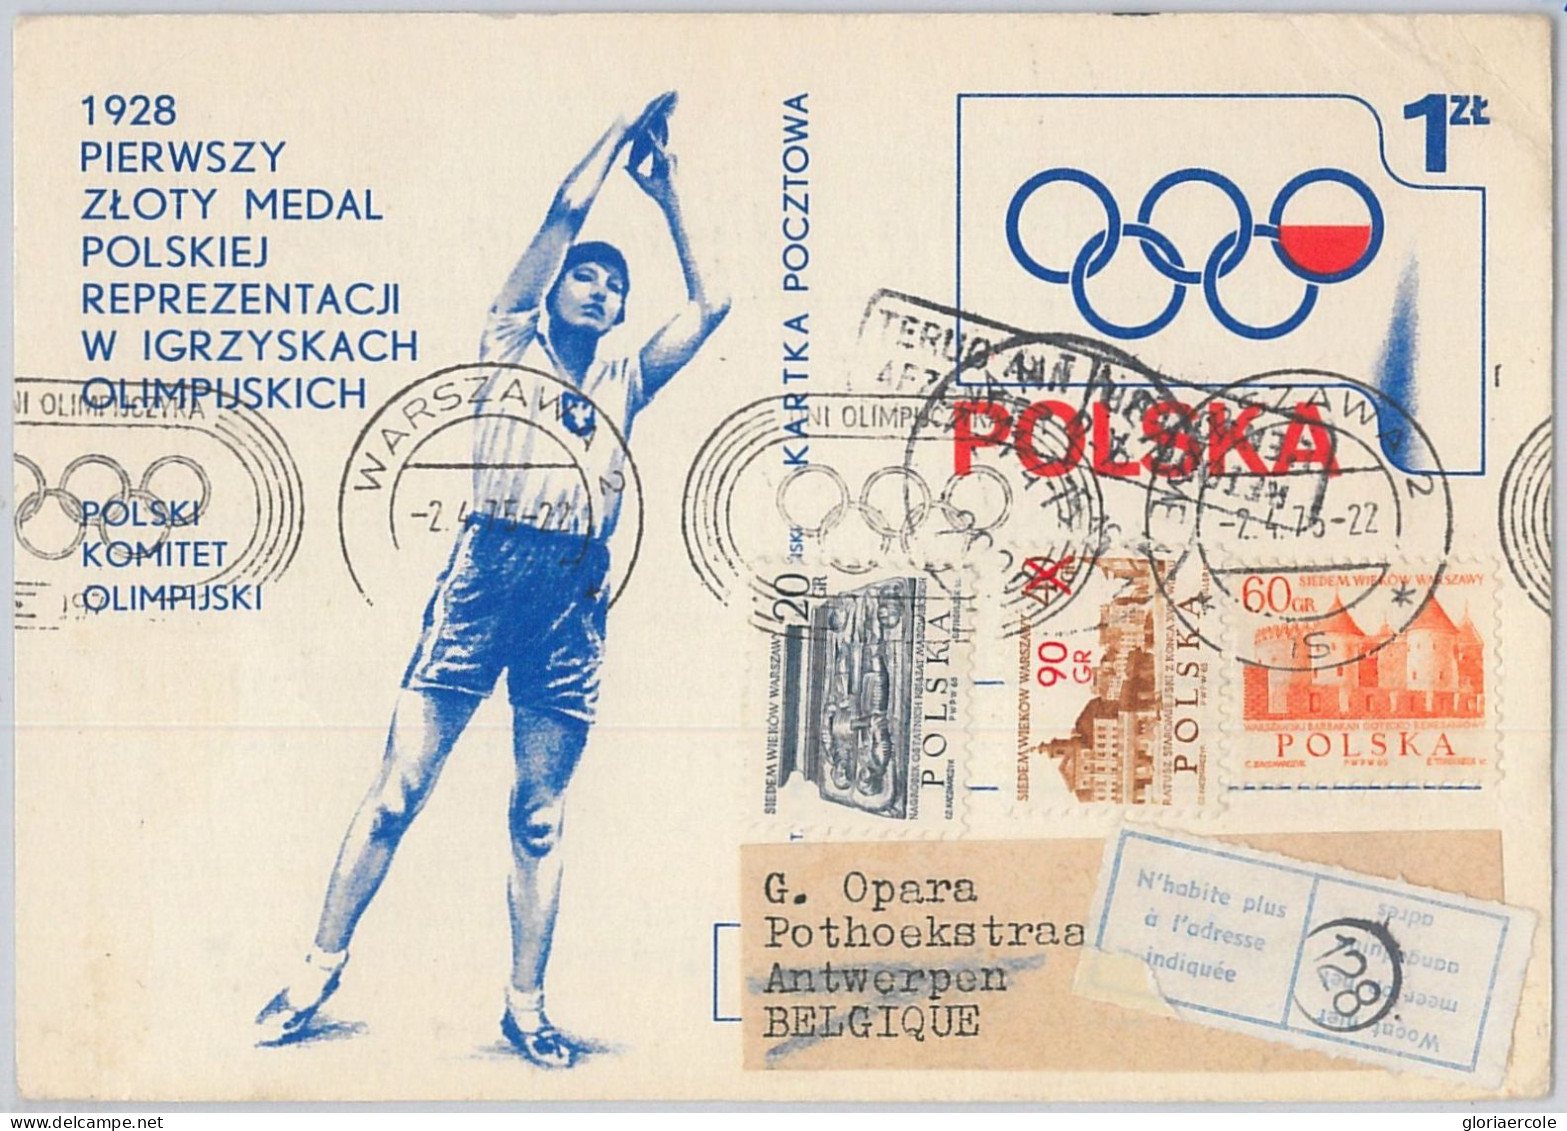 51131 - POLAND - POSTAL HISTORY -  STATIONERY 1978 OLYMPIC Games Disk Throwing - Verano 1928: Amsterdam